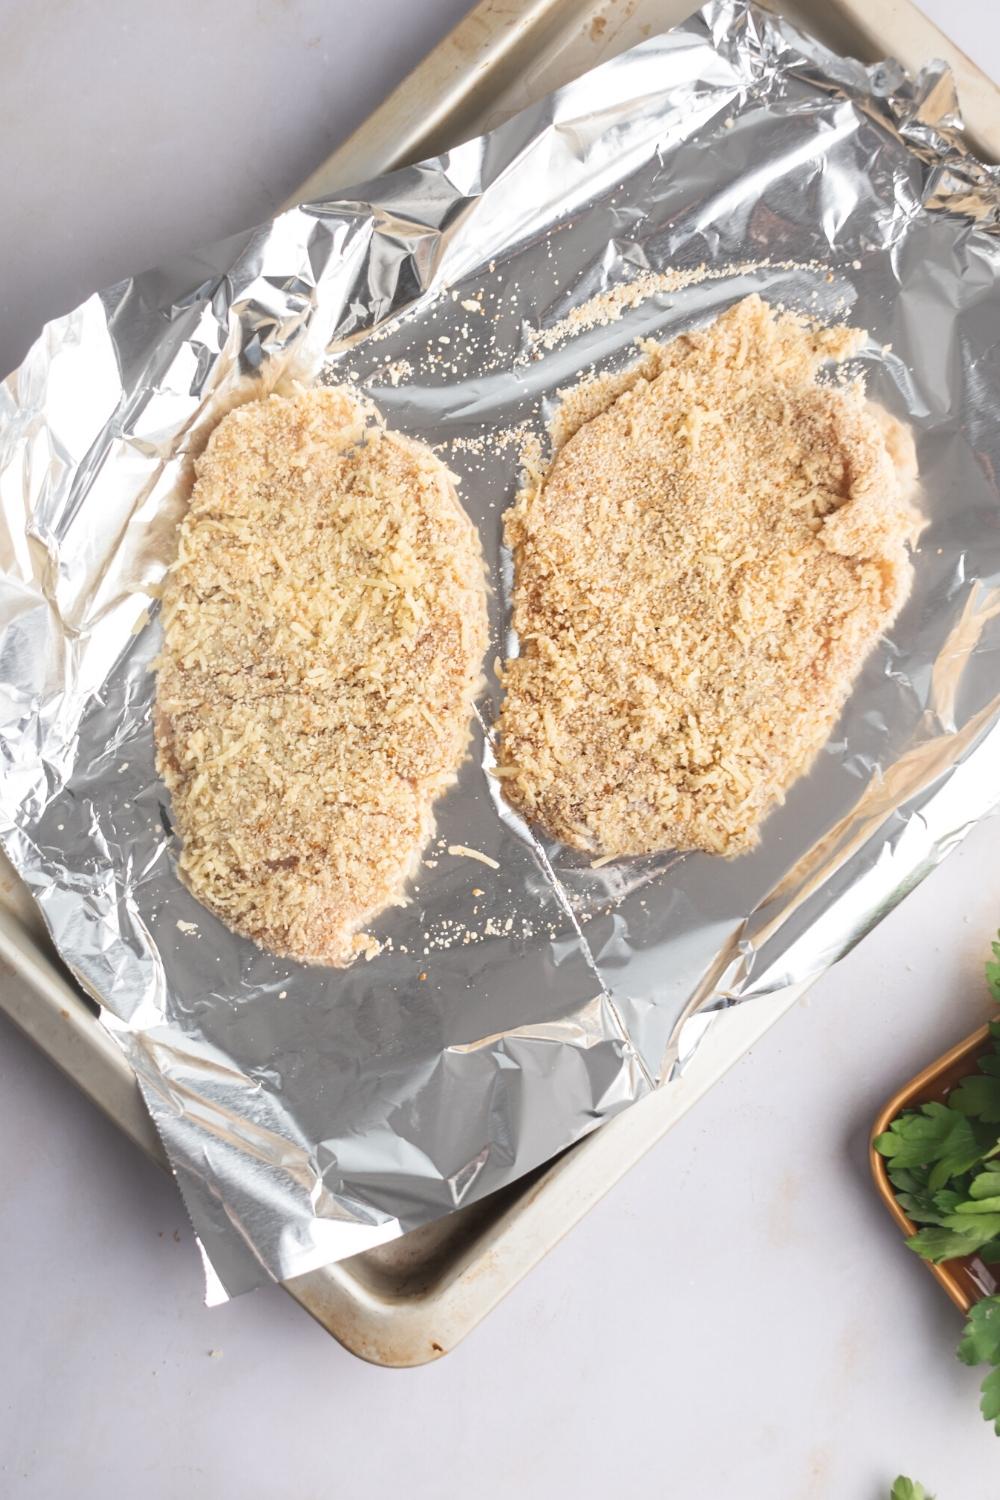 Two pieces of raw breaded chicken on a sheet of tinfoil on a baking tray.